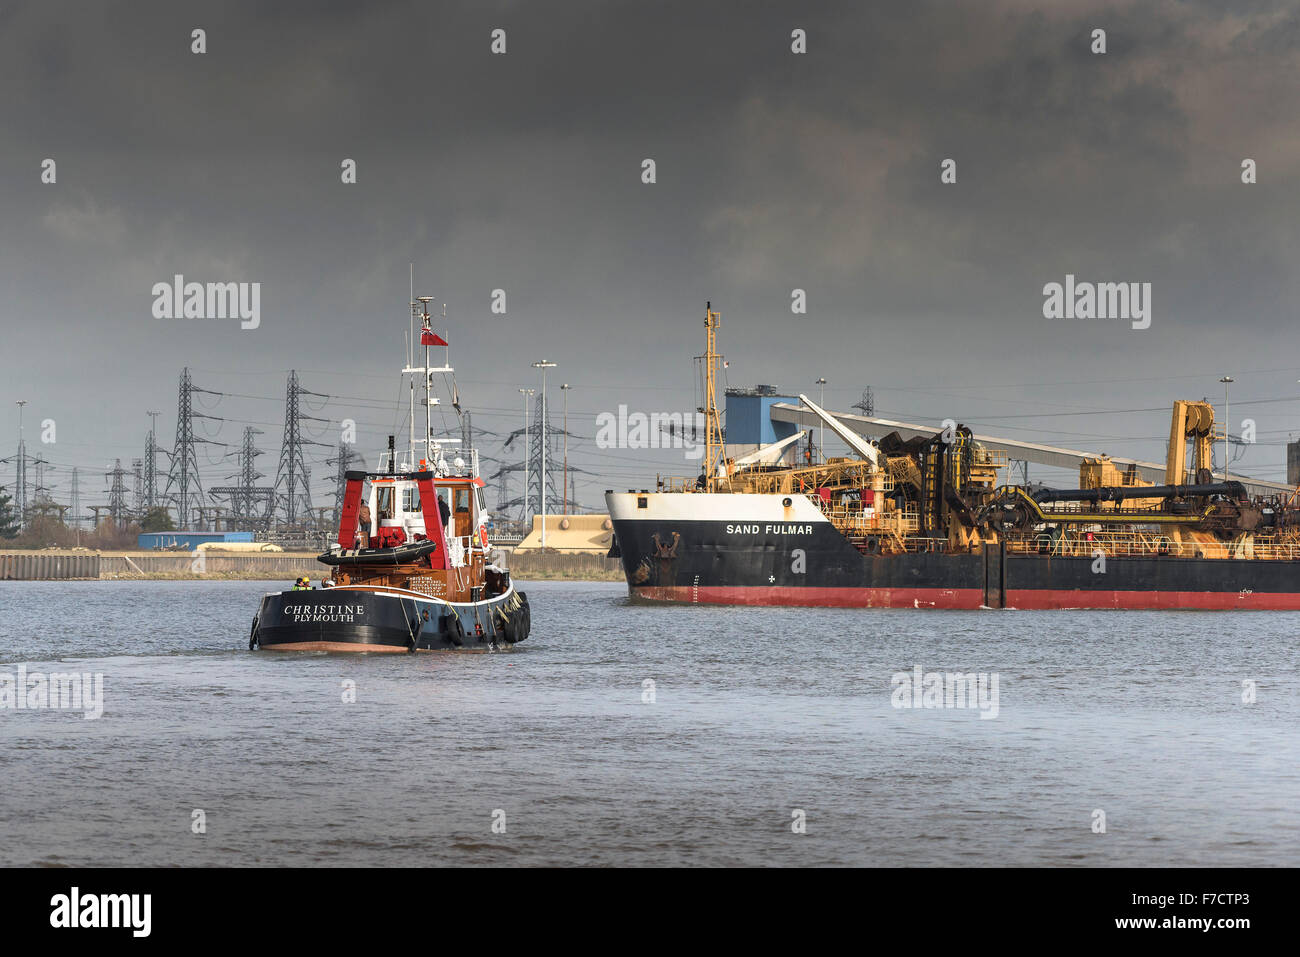 The tug Chtristine sets out out to escort the dredger, Sand Fulmar as she steams upriver on the River Thames. Stock Photo